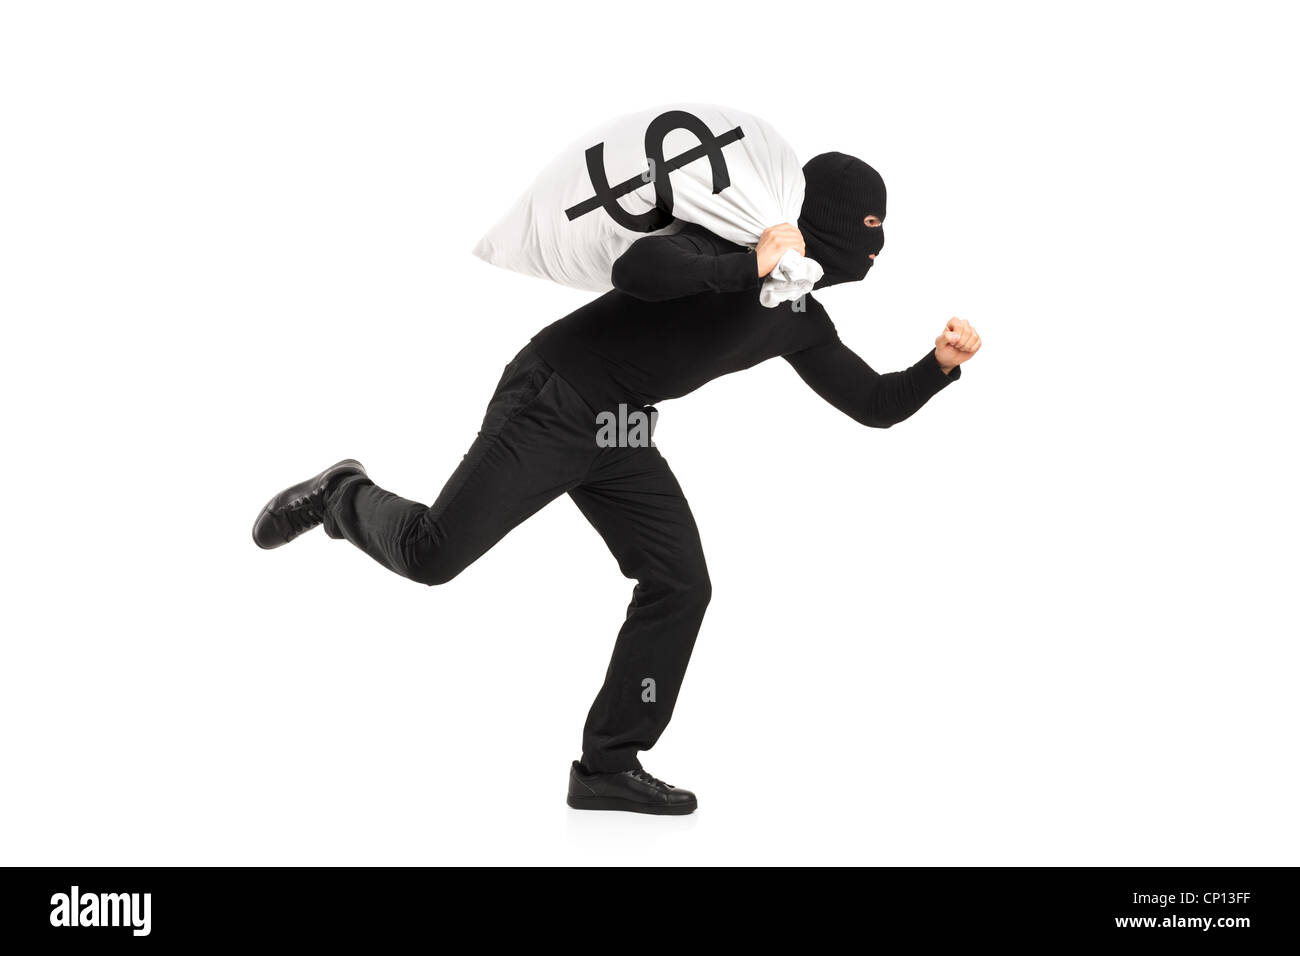 A thief carrying a bag and running away isolated against white background Stock Photo